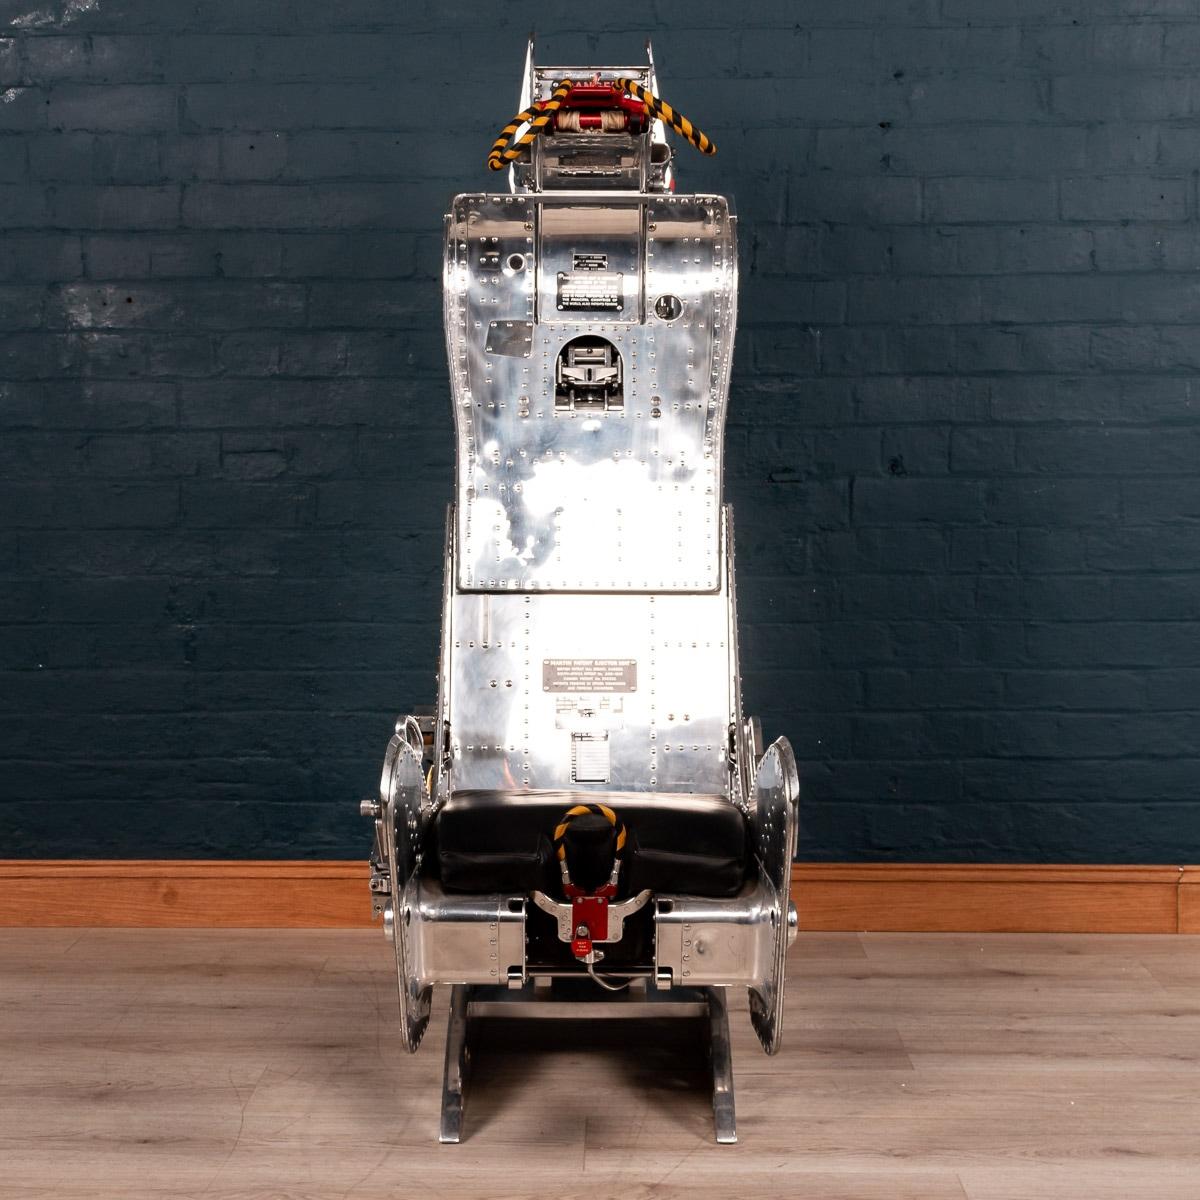 A fantastic ejection seat made by Martin Baker made for the Royal Air Force Canberra Jet which were in operation in the early 1960s. This superbly detailed, highly polished ejection seat with bespoke leather seat is now a height adjustable, fully